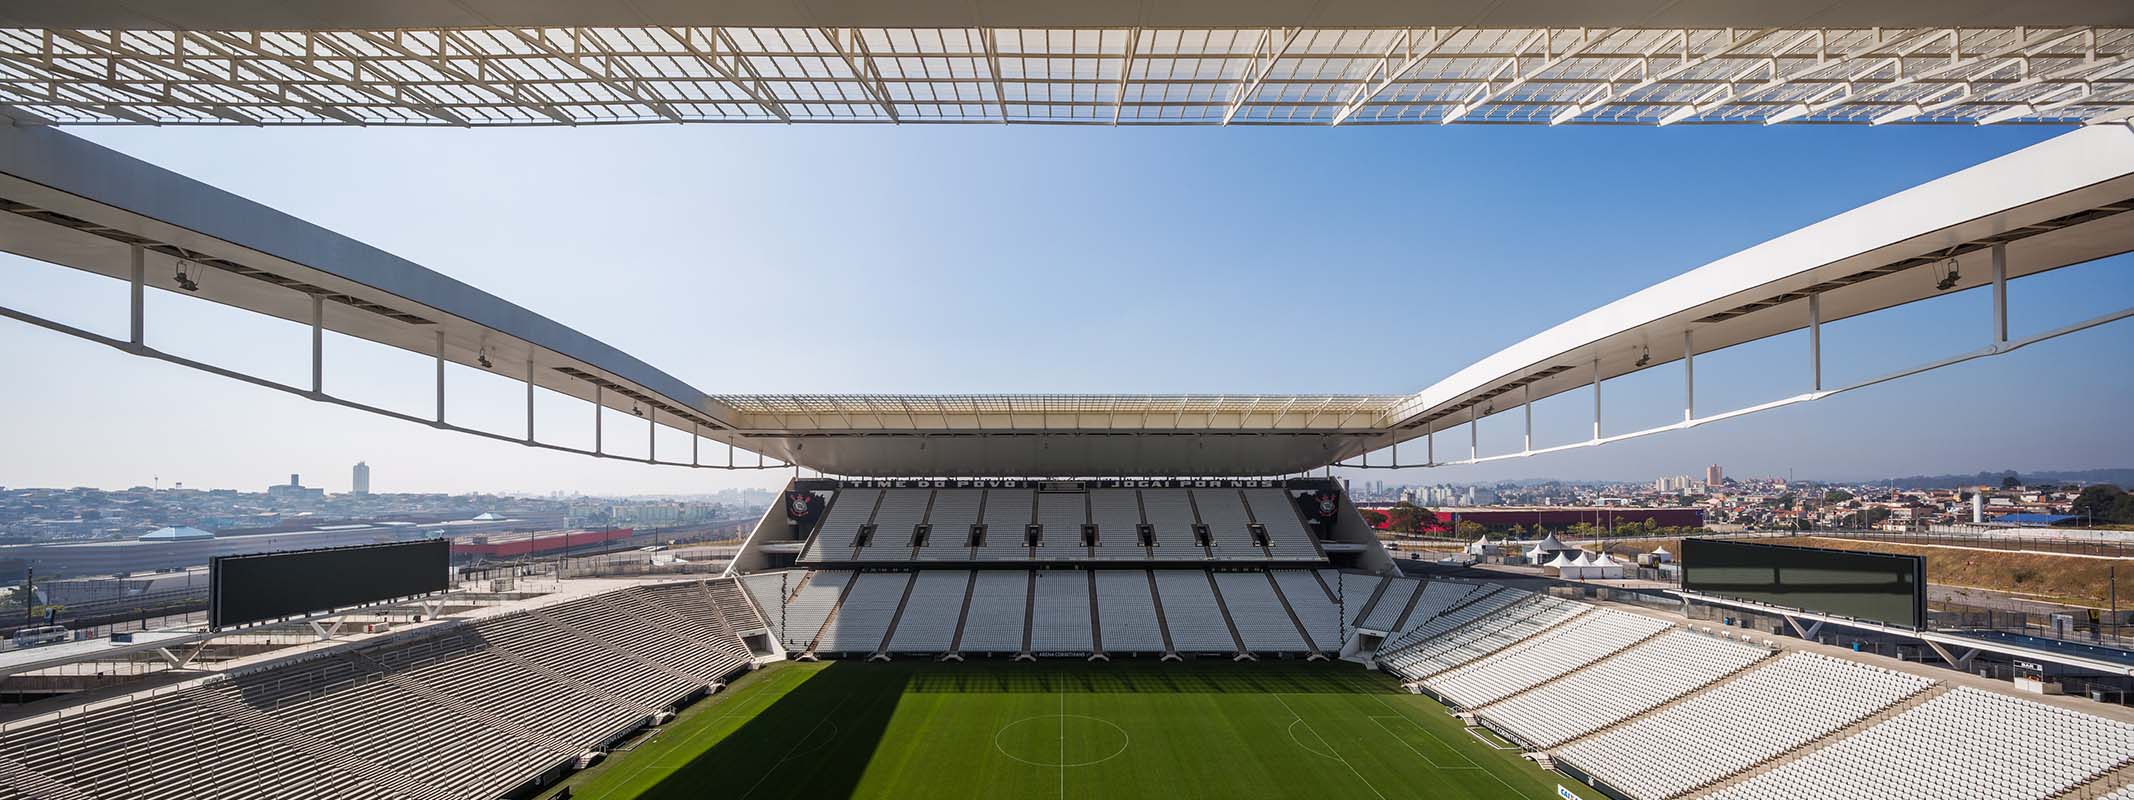 Stadium roofed built by Structurflex